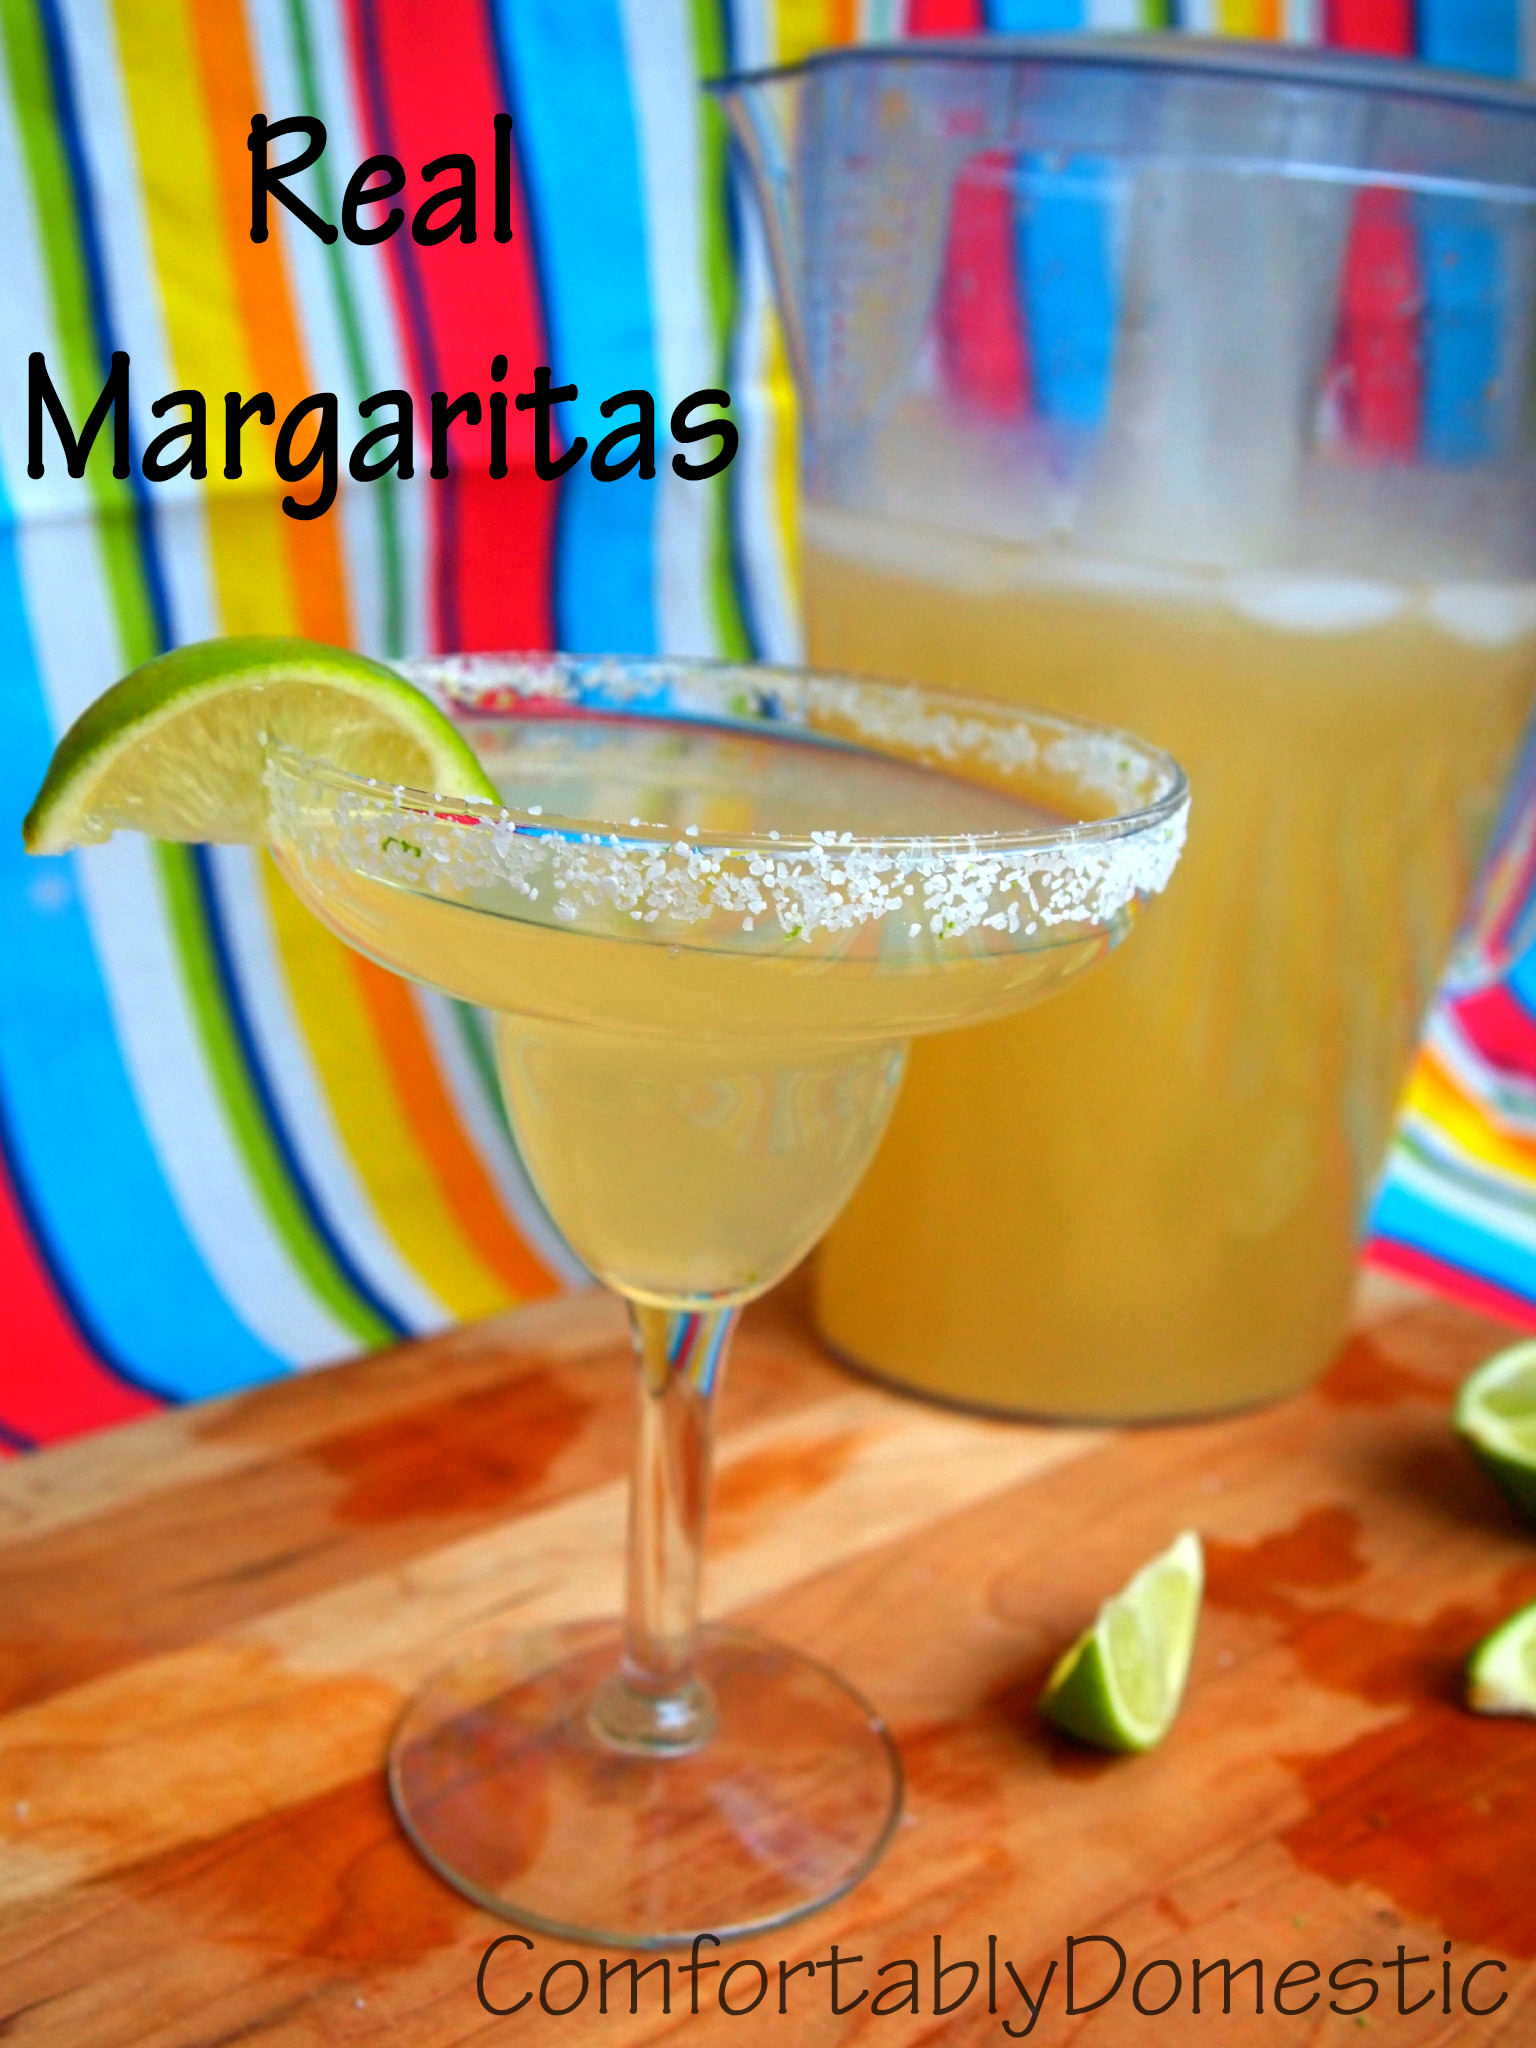 REAL Margaritas, made with homemade sour mix, are the perfect way to celebrate Cinco de Mayo or the Kentucky Derby.